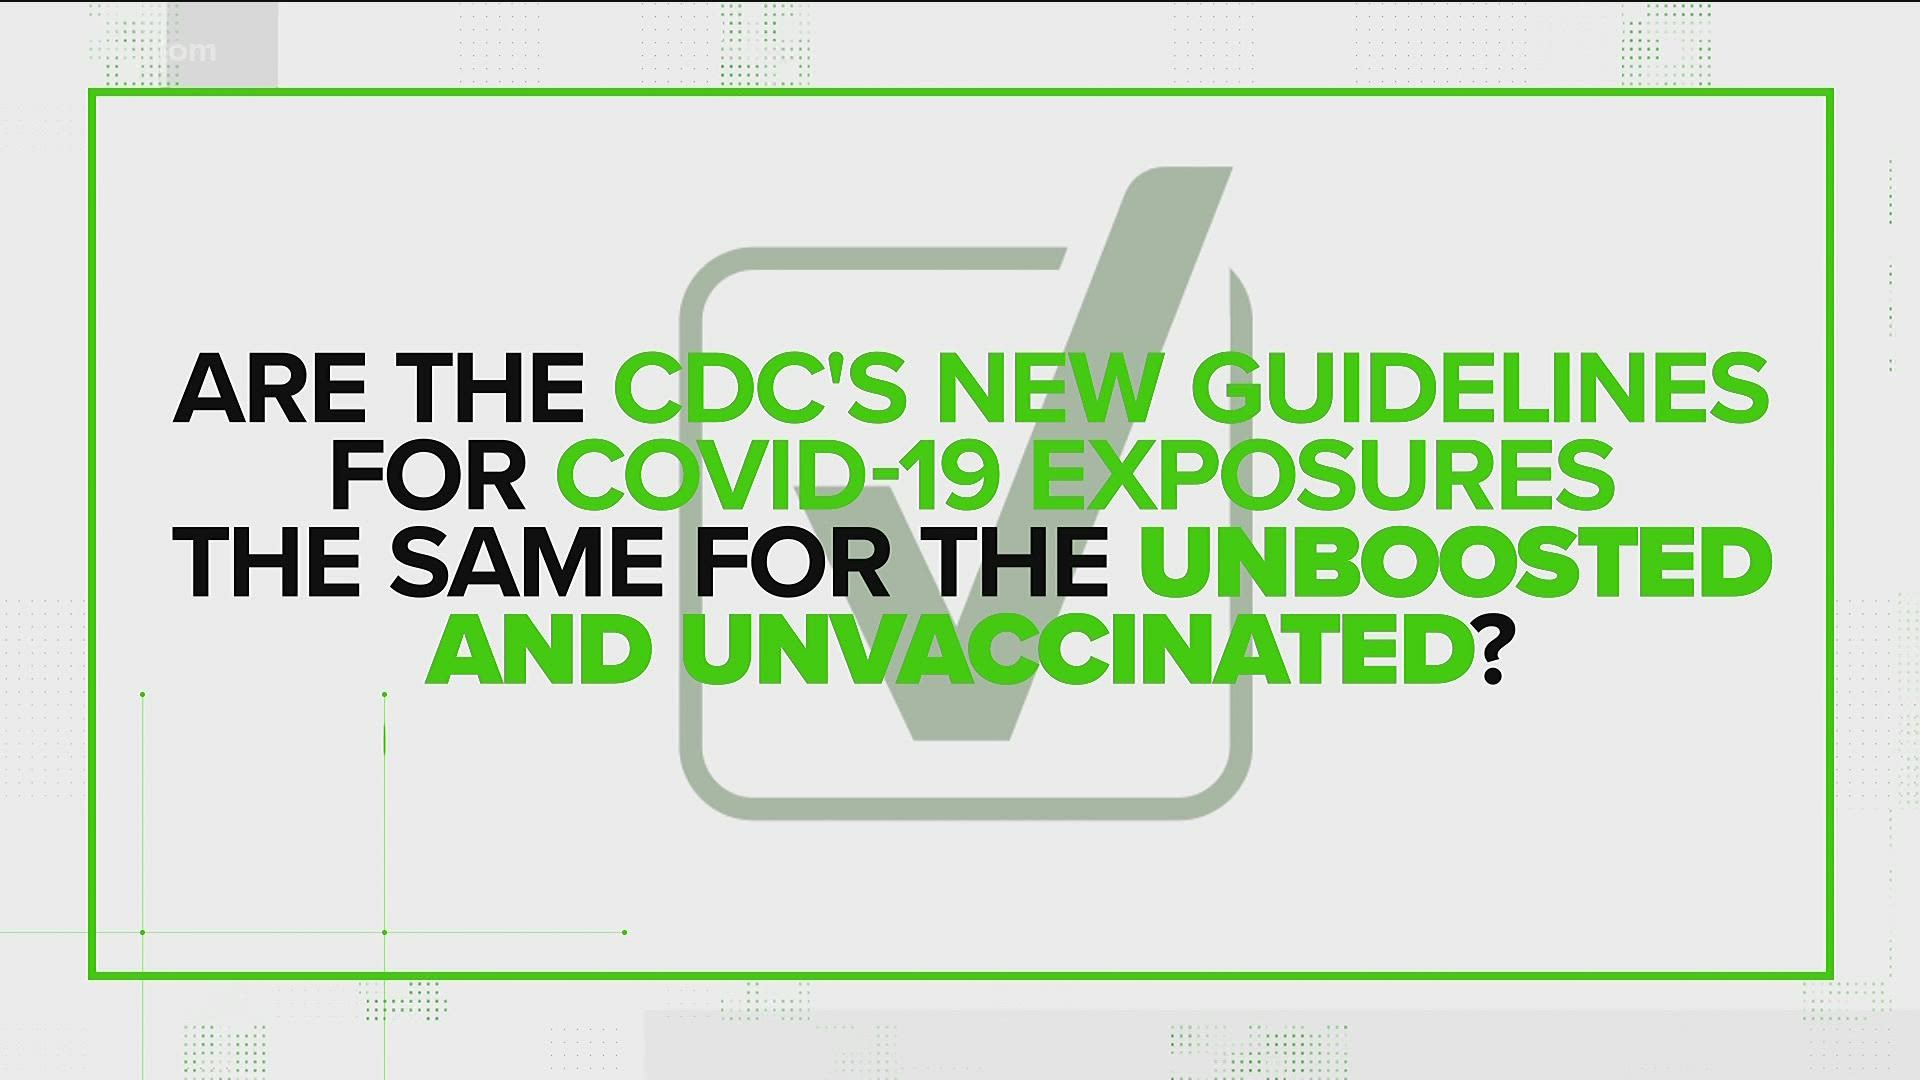 There is still some confusion over the guidance for people who have been exposed to the virus.